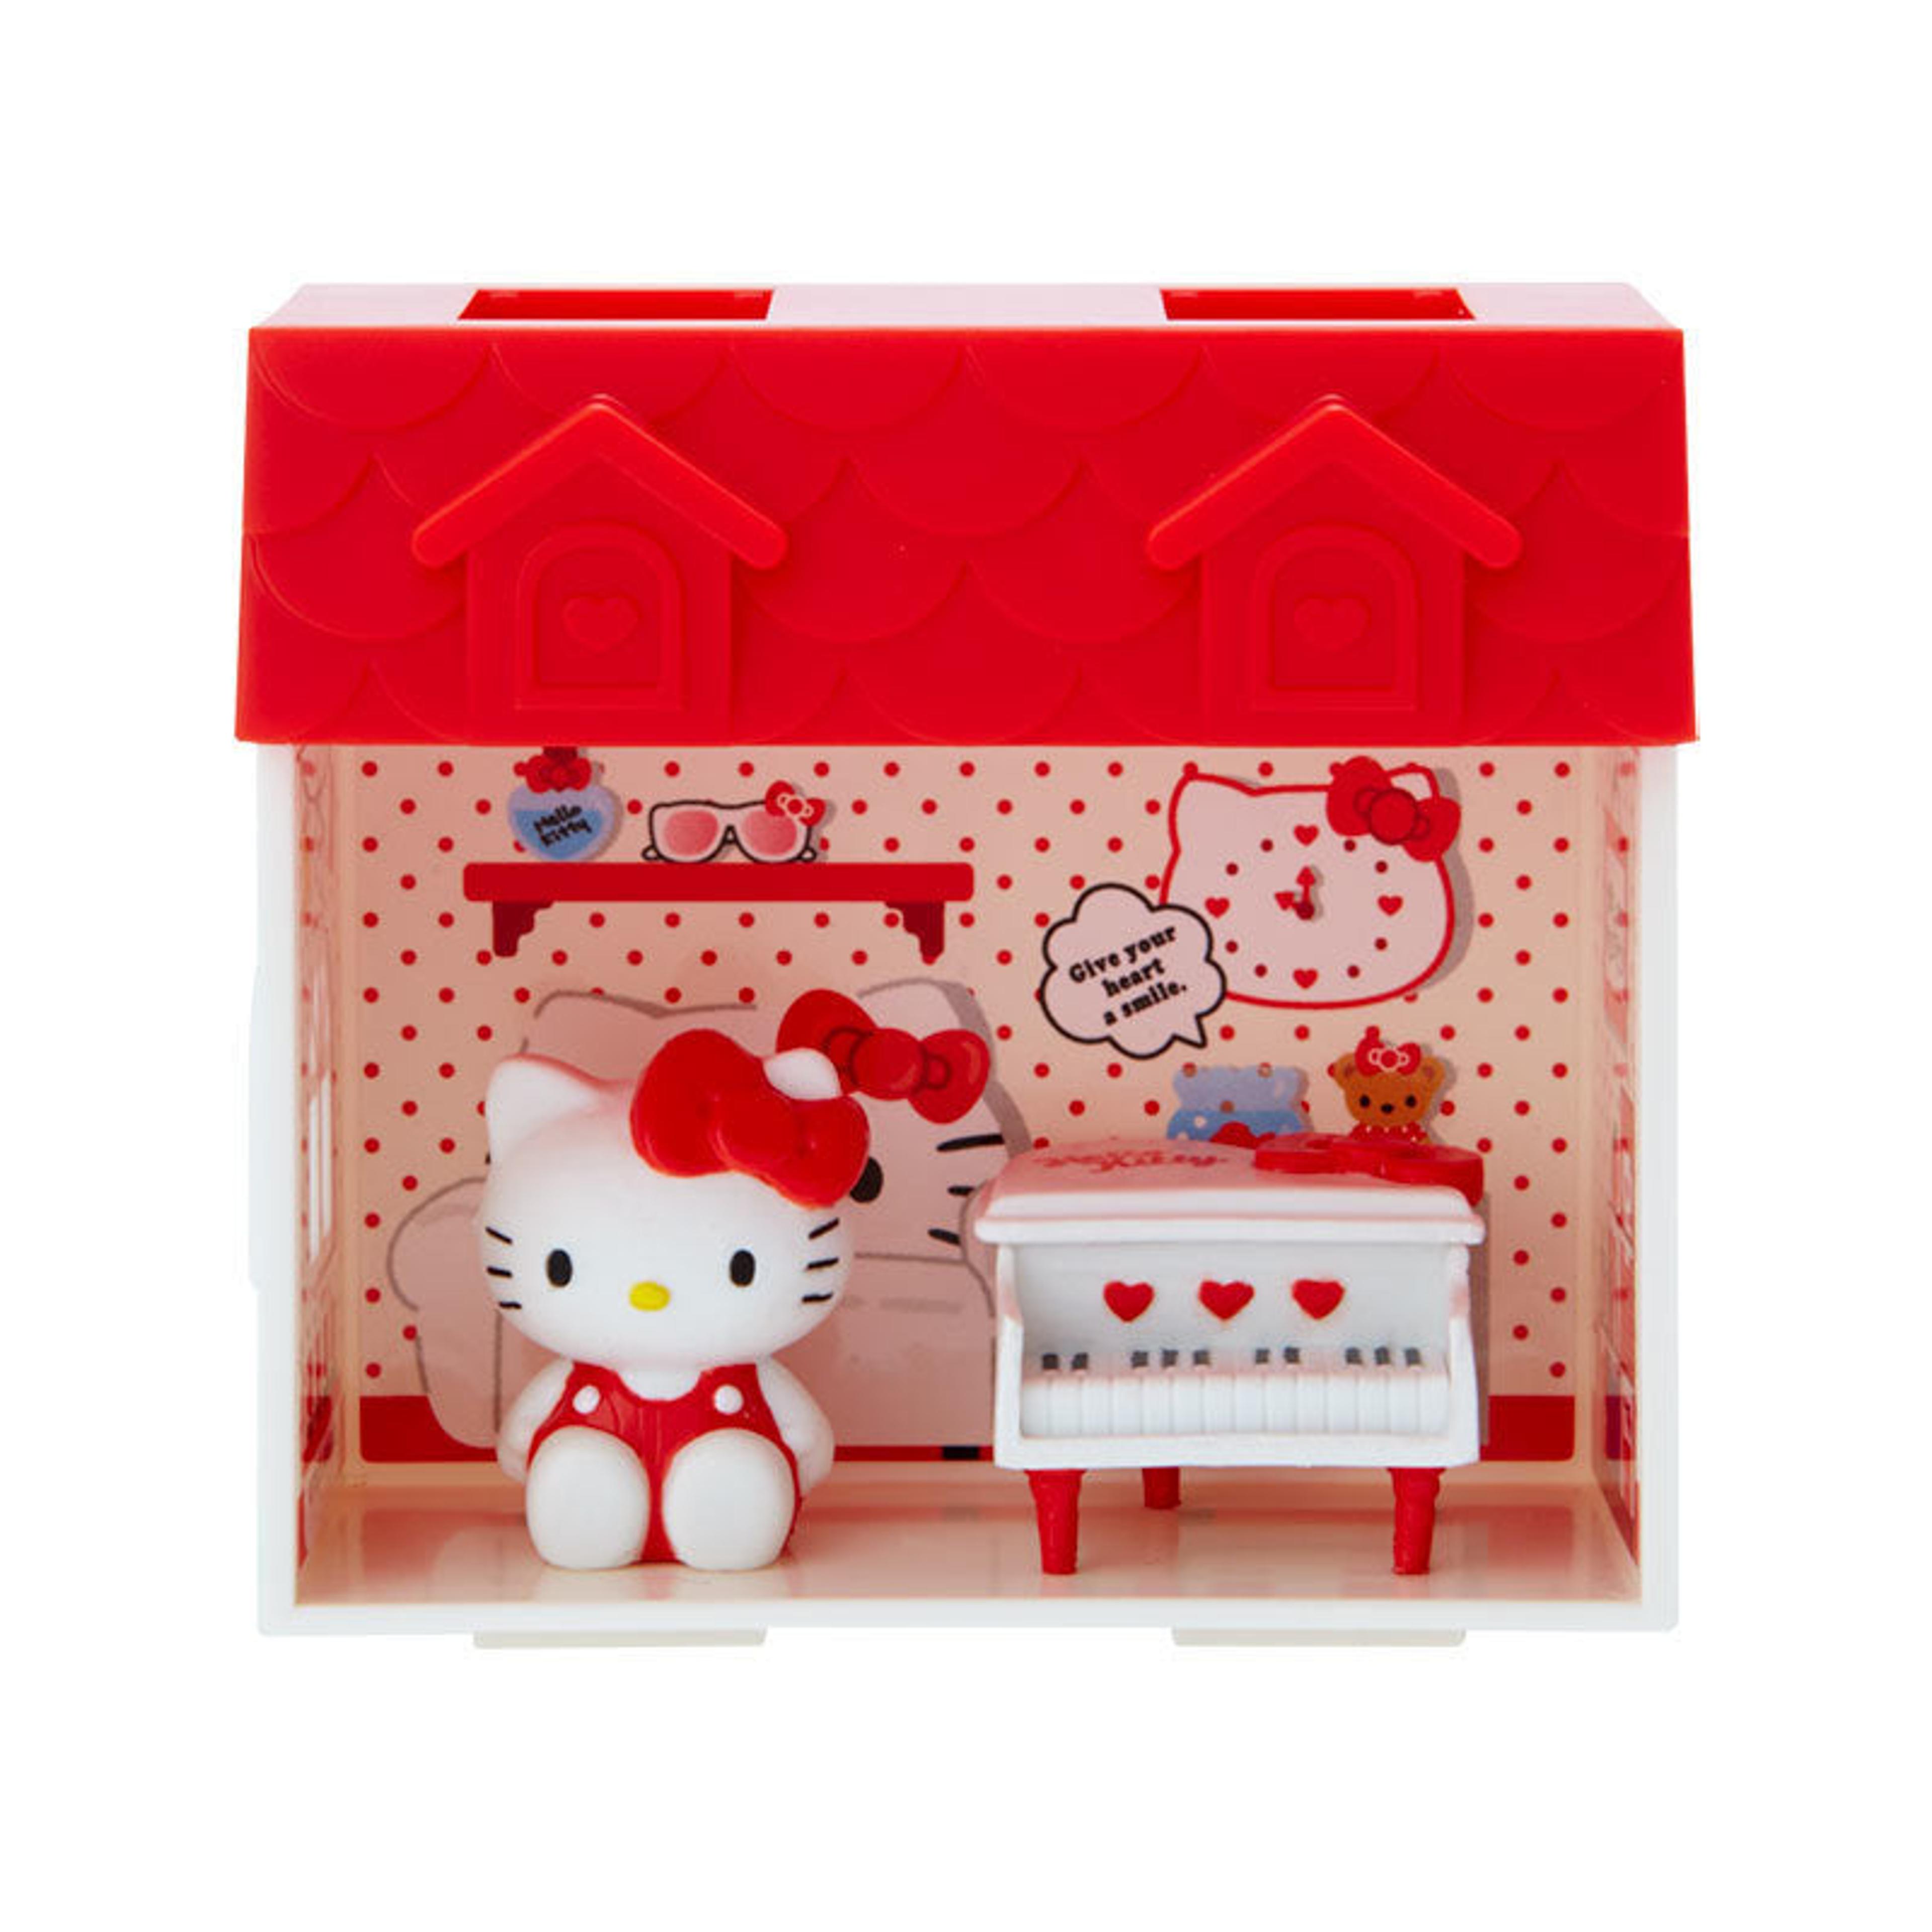 Alternate View 1 of Sanrio Characters Miniature House